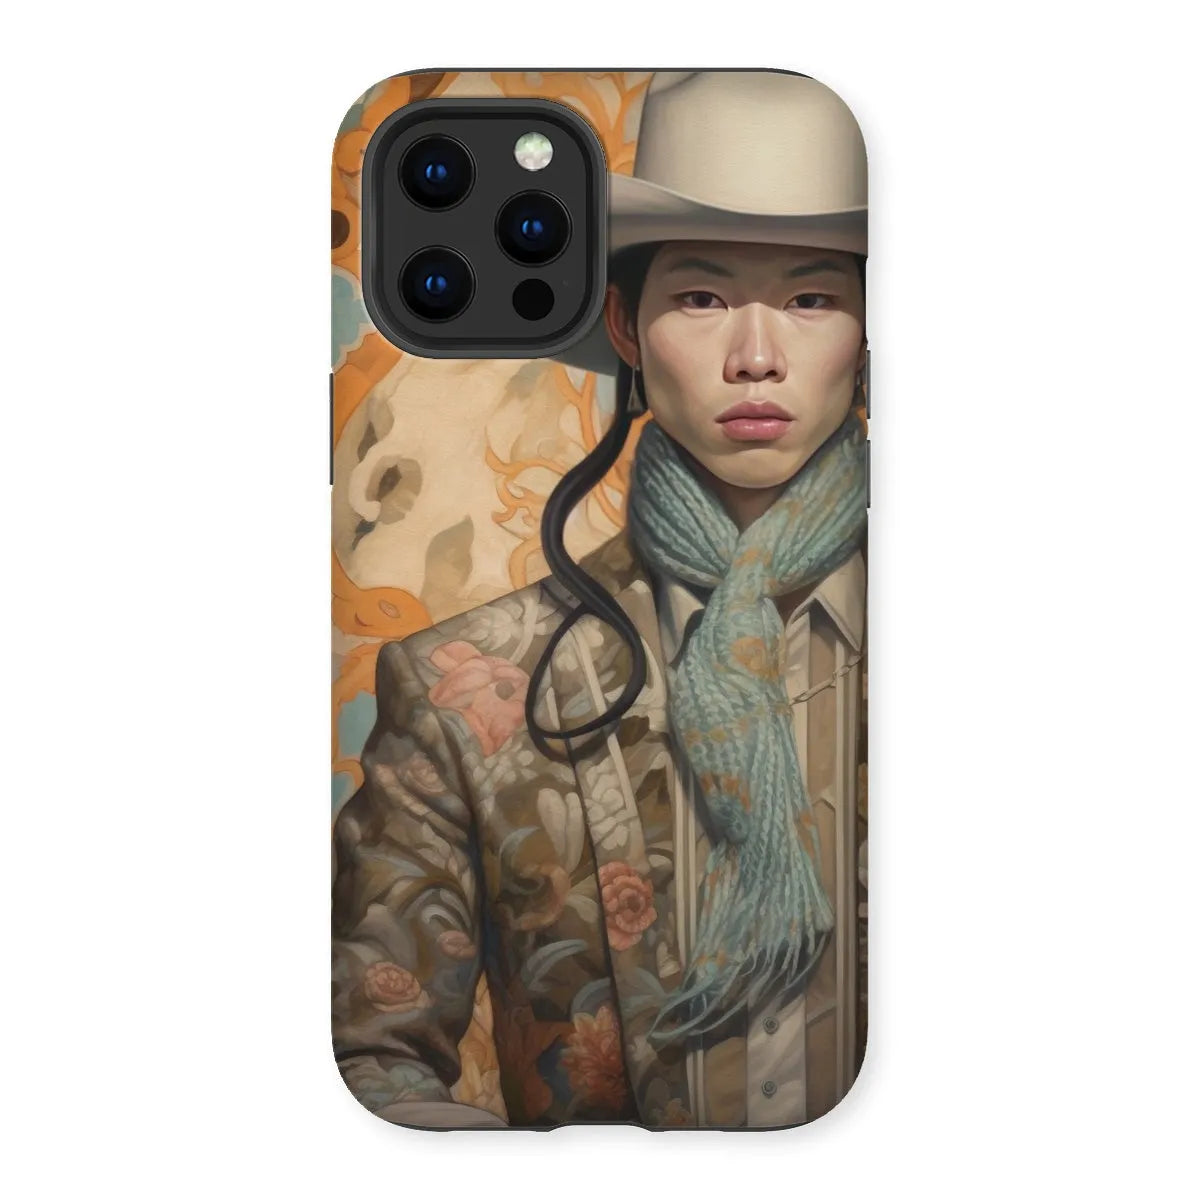 Baihu The Gay Cowboy - Gay Aesthetic Art Phone Case - Iphone 12 Pro Max / Matte - Mobile Phone Cases - Aesthetic Art